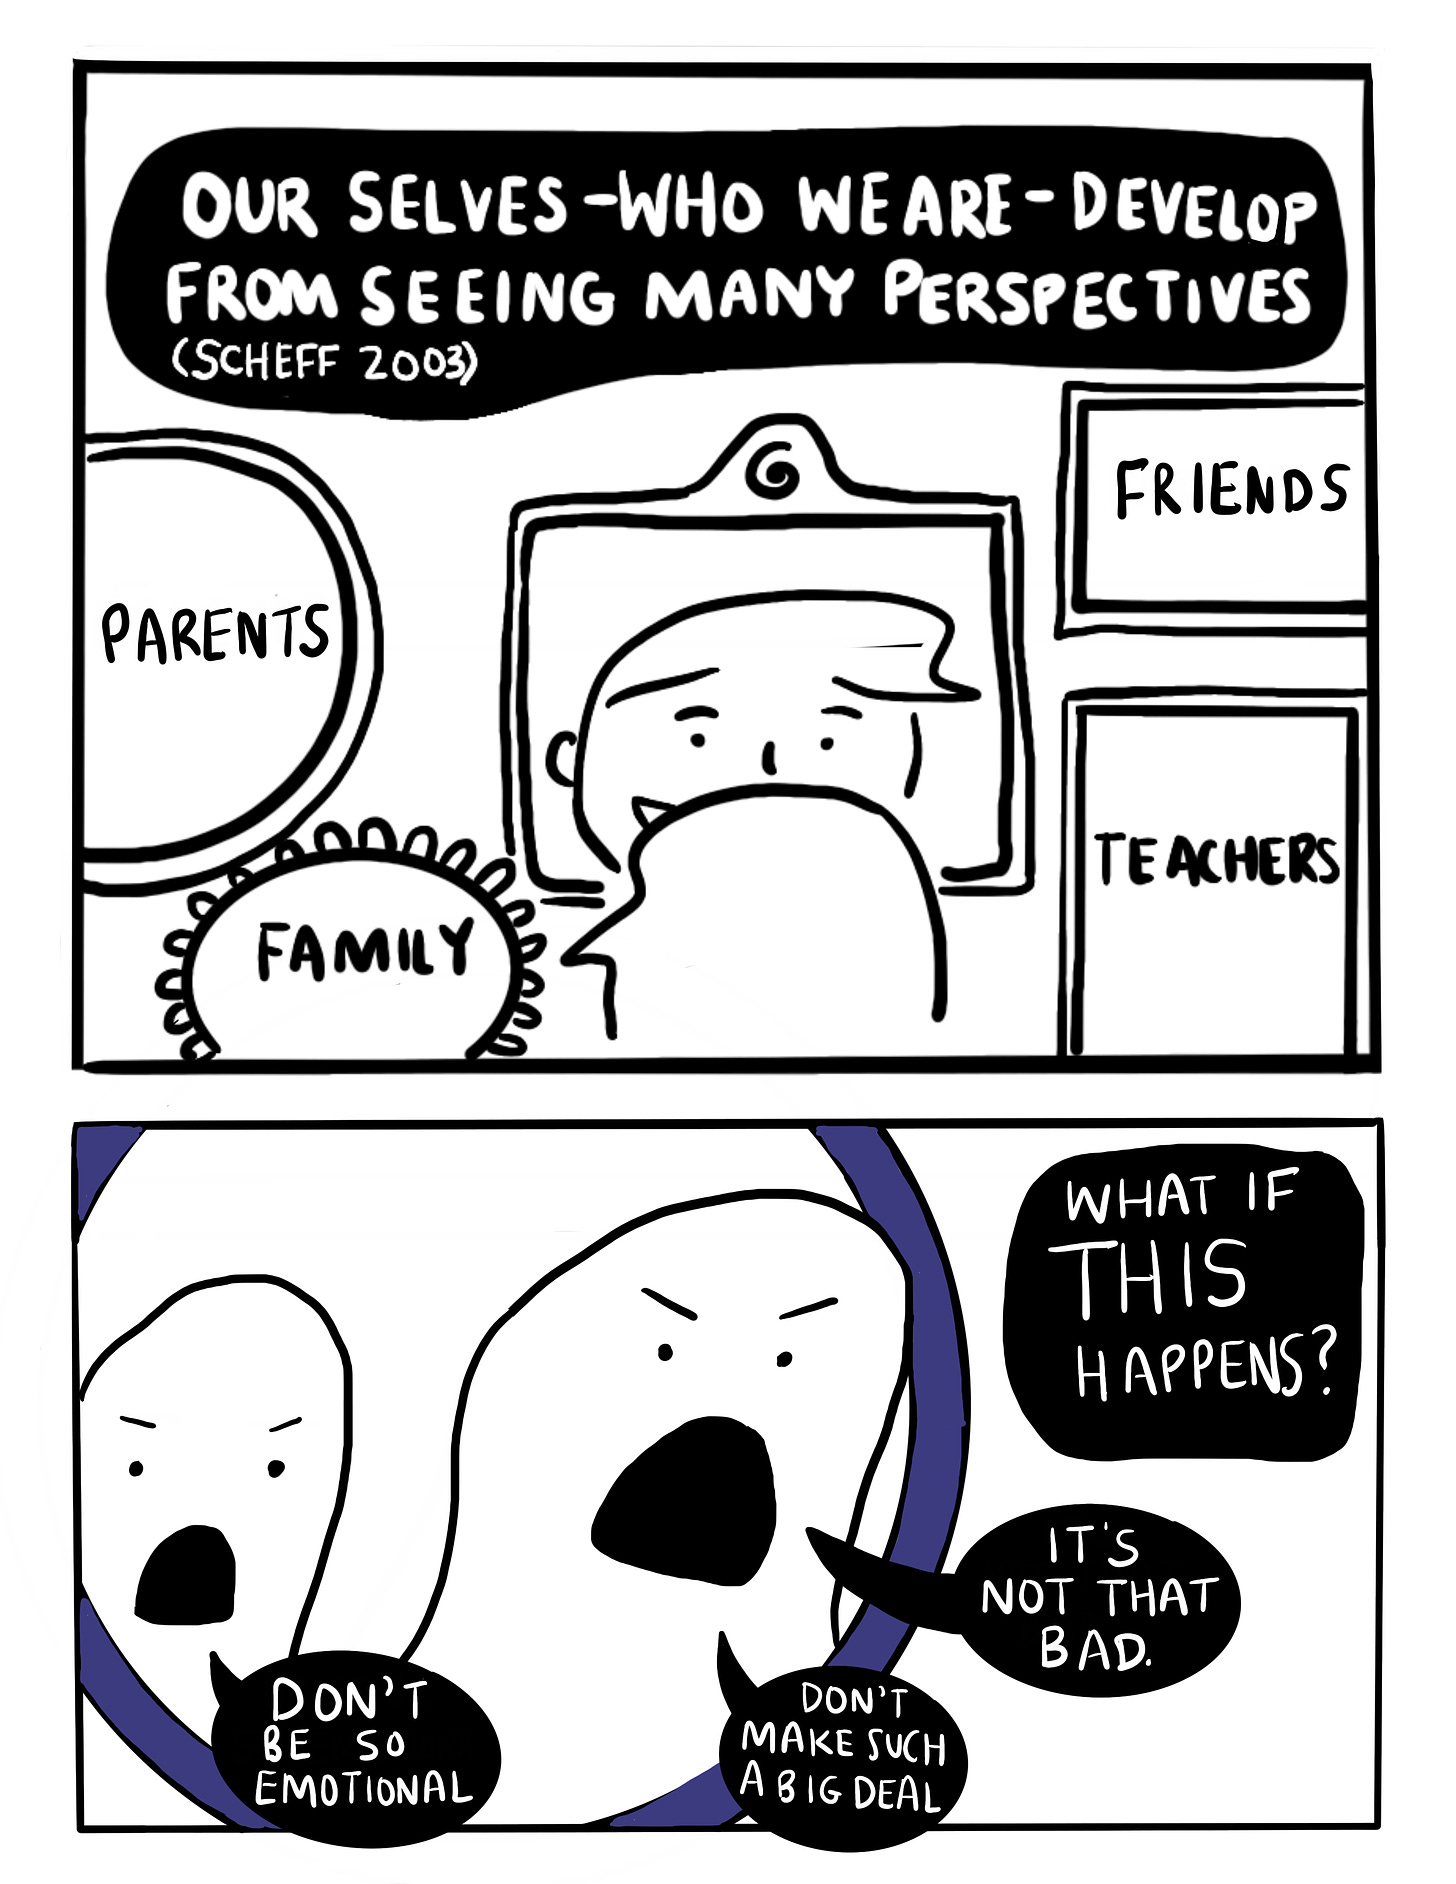 Panel 1 text: Our selves who we are—develop from seeing many perspectives (Scheff 2003). Cartoon person with short hair smiling into a mirror surrounded by other mirrors that say “parents” “family” “friends” “teachers” Panel 2 text: What if this happens? Two angry ghosts poking out of a round mirror saying “don’t be so emotional, don’t make such a big deal, it’s not that bad”